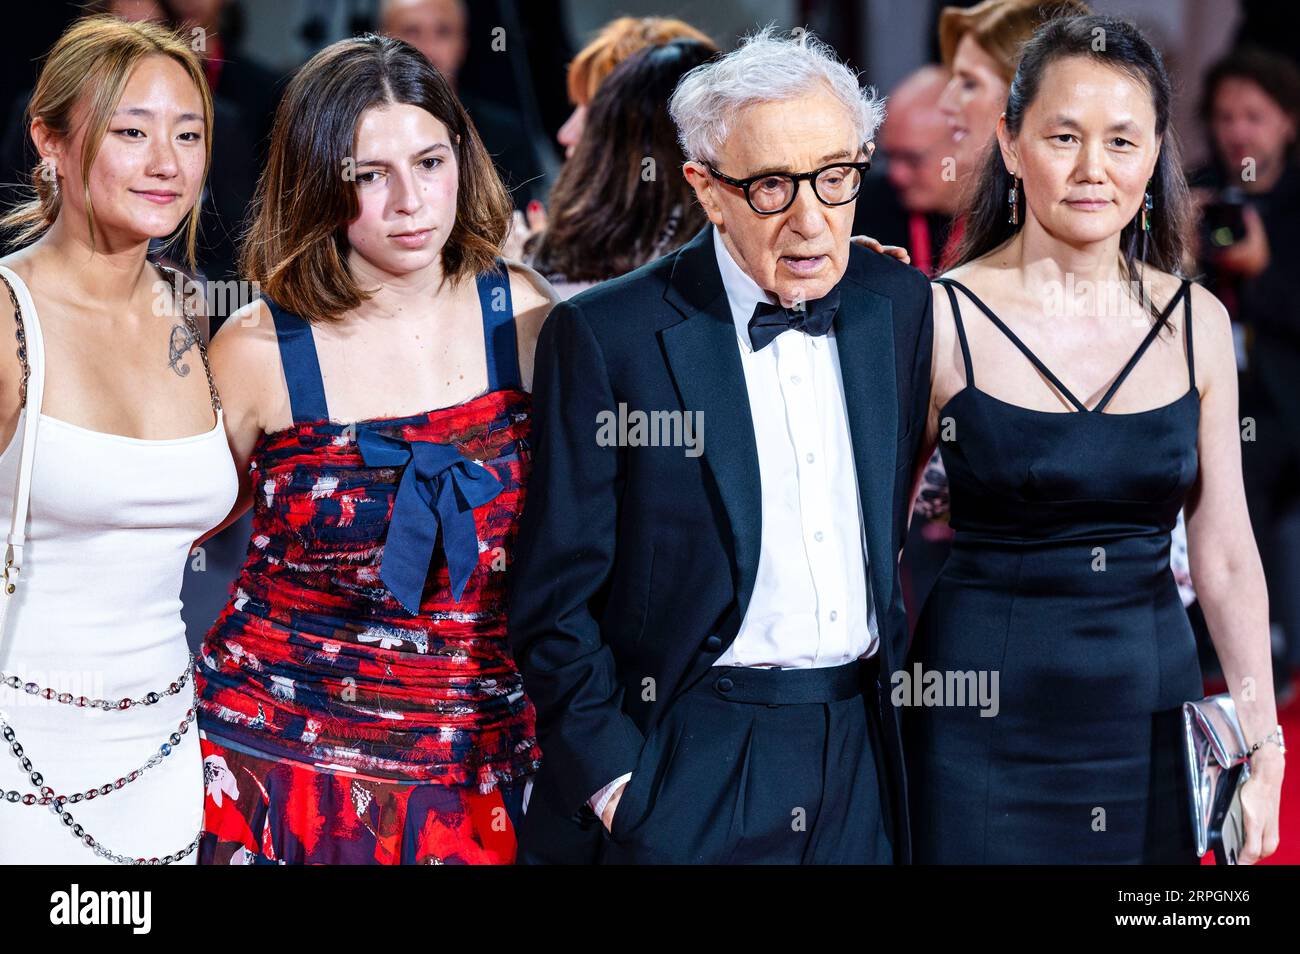 Venice, Italy. September 4th, 2023. Bechet Allen, Manzie Allen, Woody Allen, and Soon-Yi Previn arrives at the premiere of Coup de chance at Sala Grande at the 80th Venice International Film Festival.   Credit: Euan Cherry/Alamy Live News Stock Photo